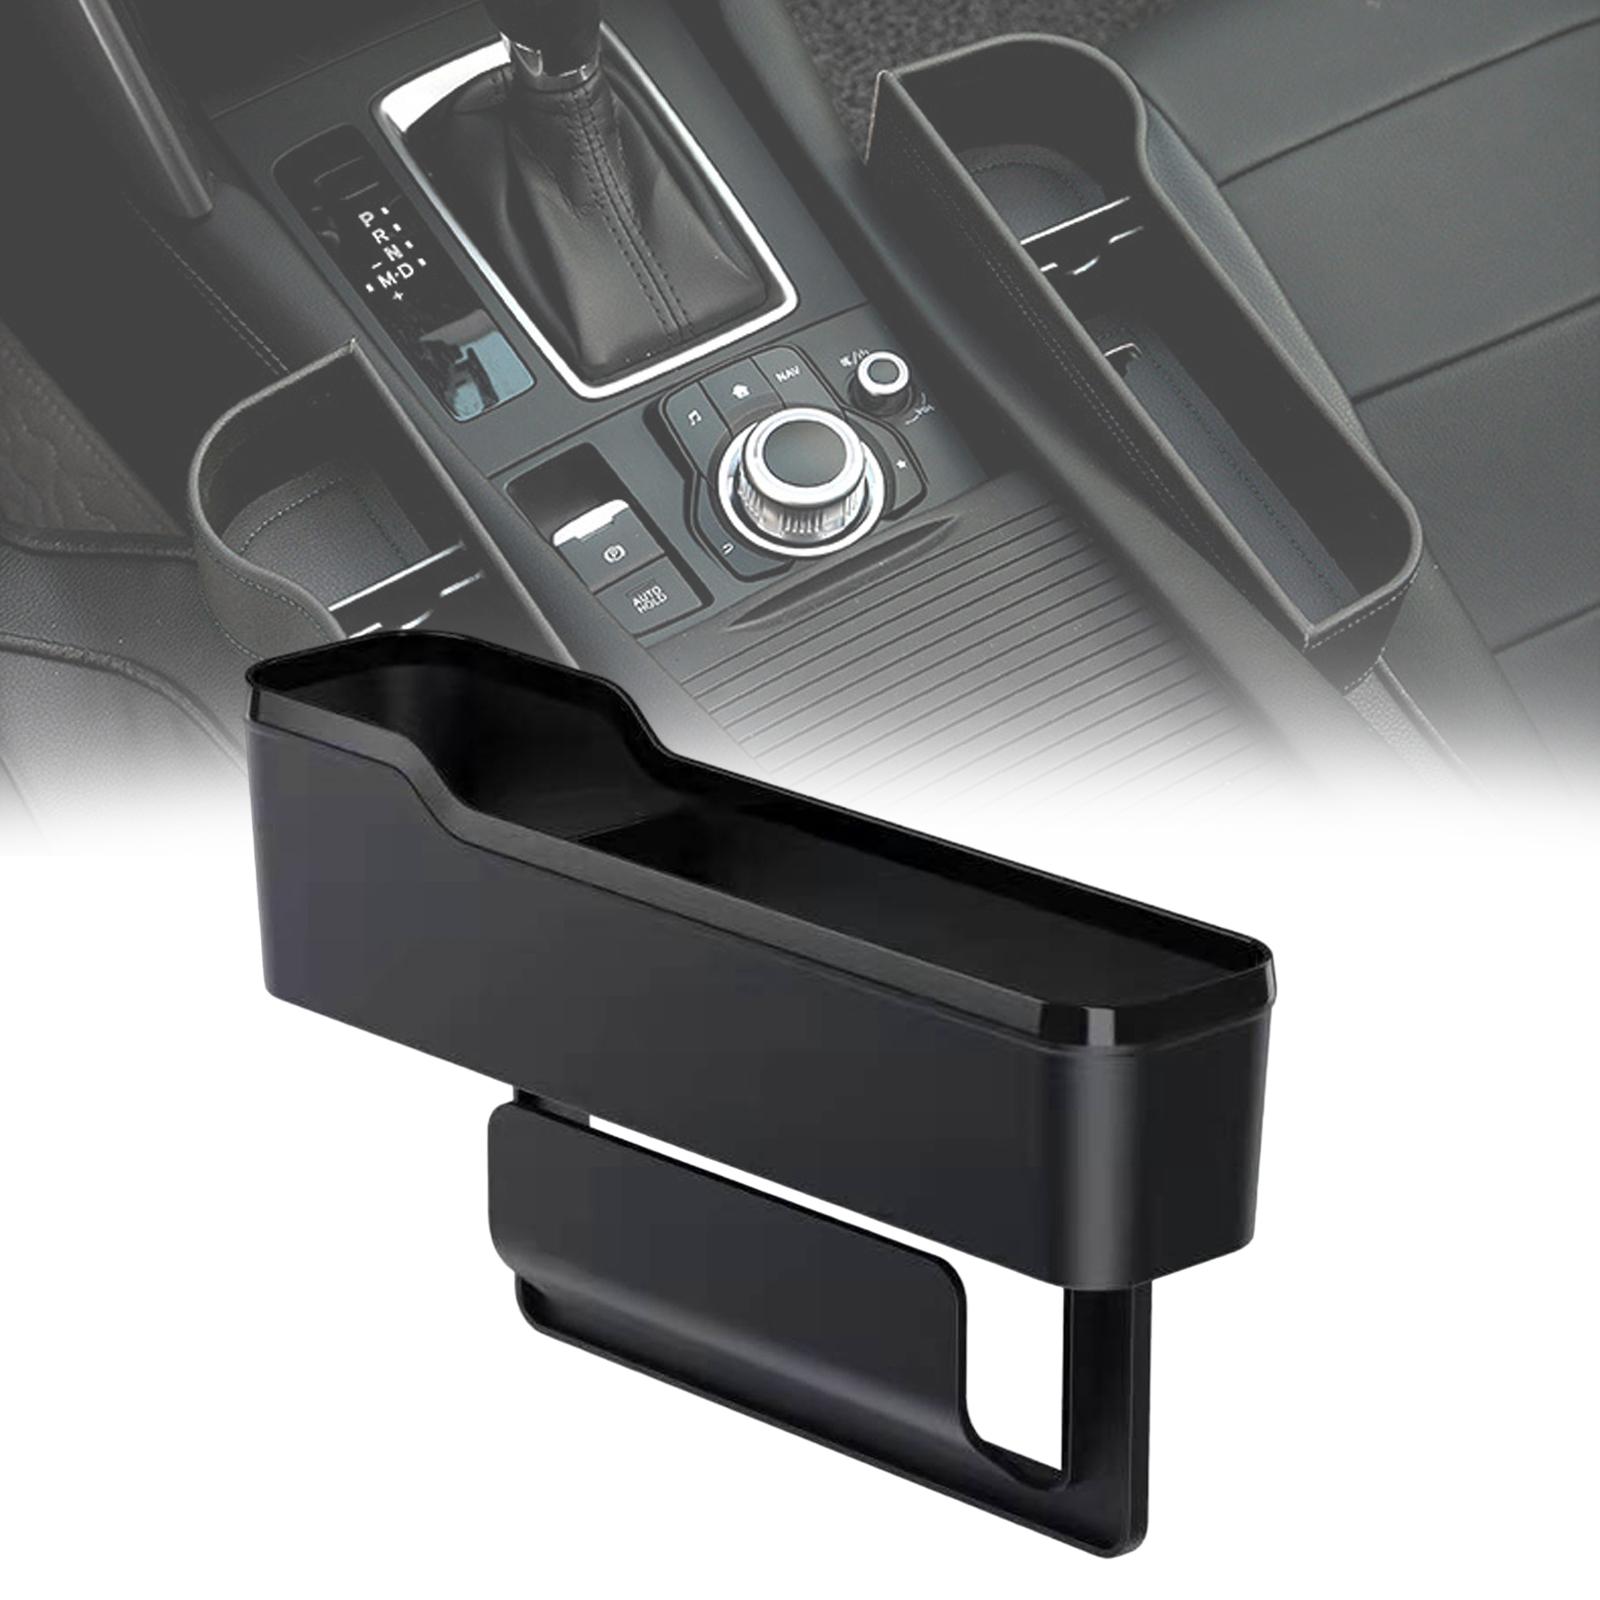 Car Interior Seat Gap Organizer with Cup Holder Accessory for Holding Phone Long Black